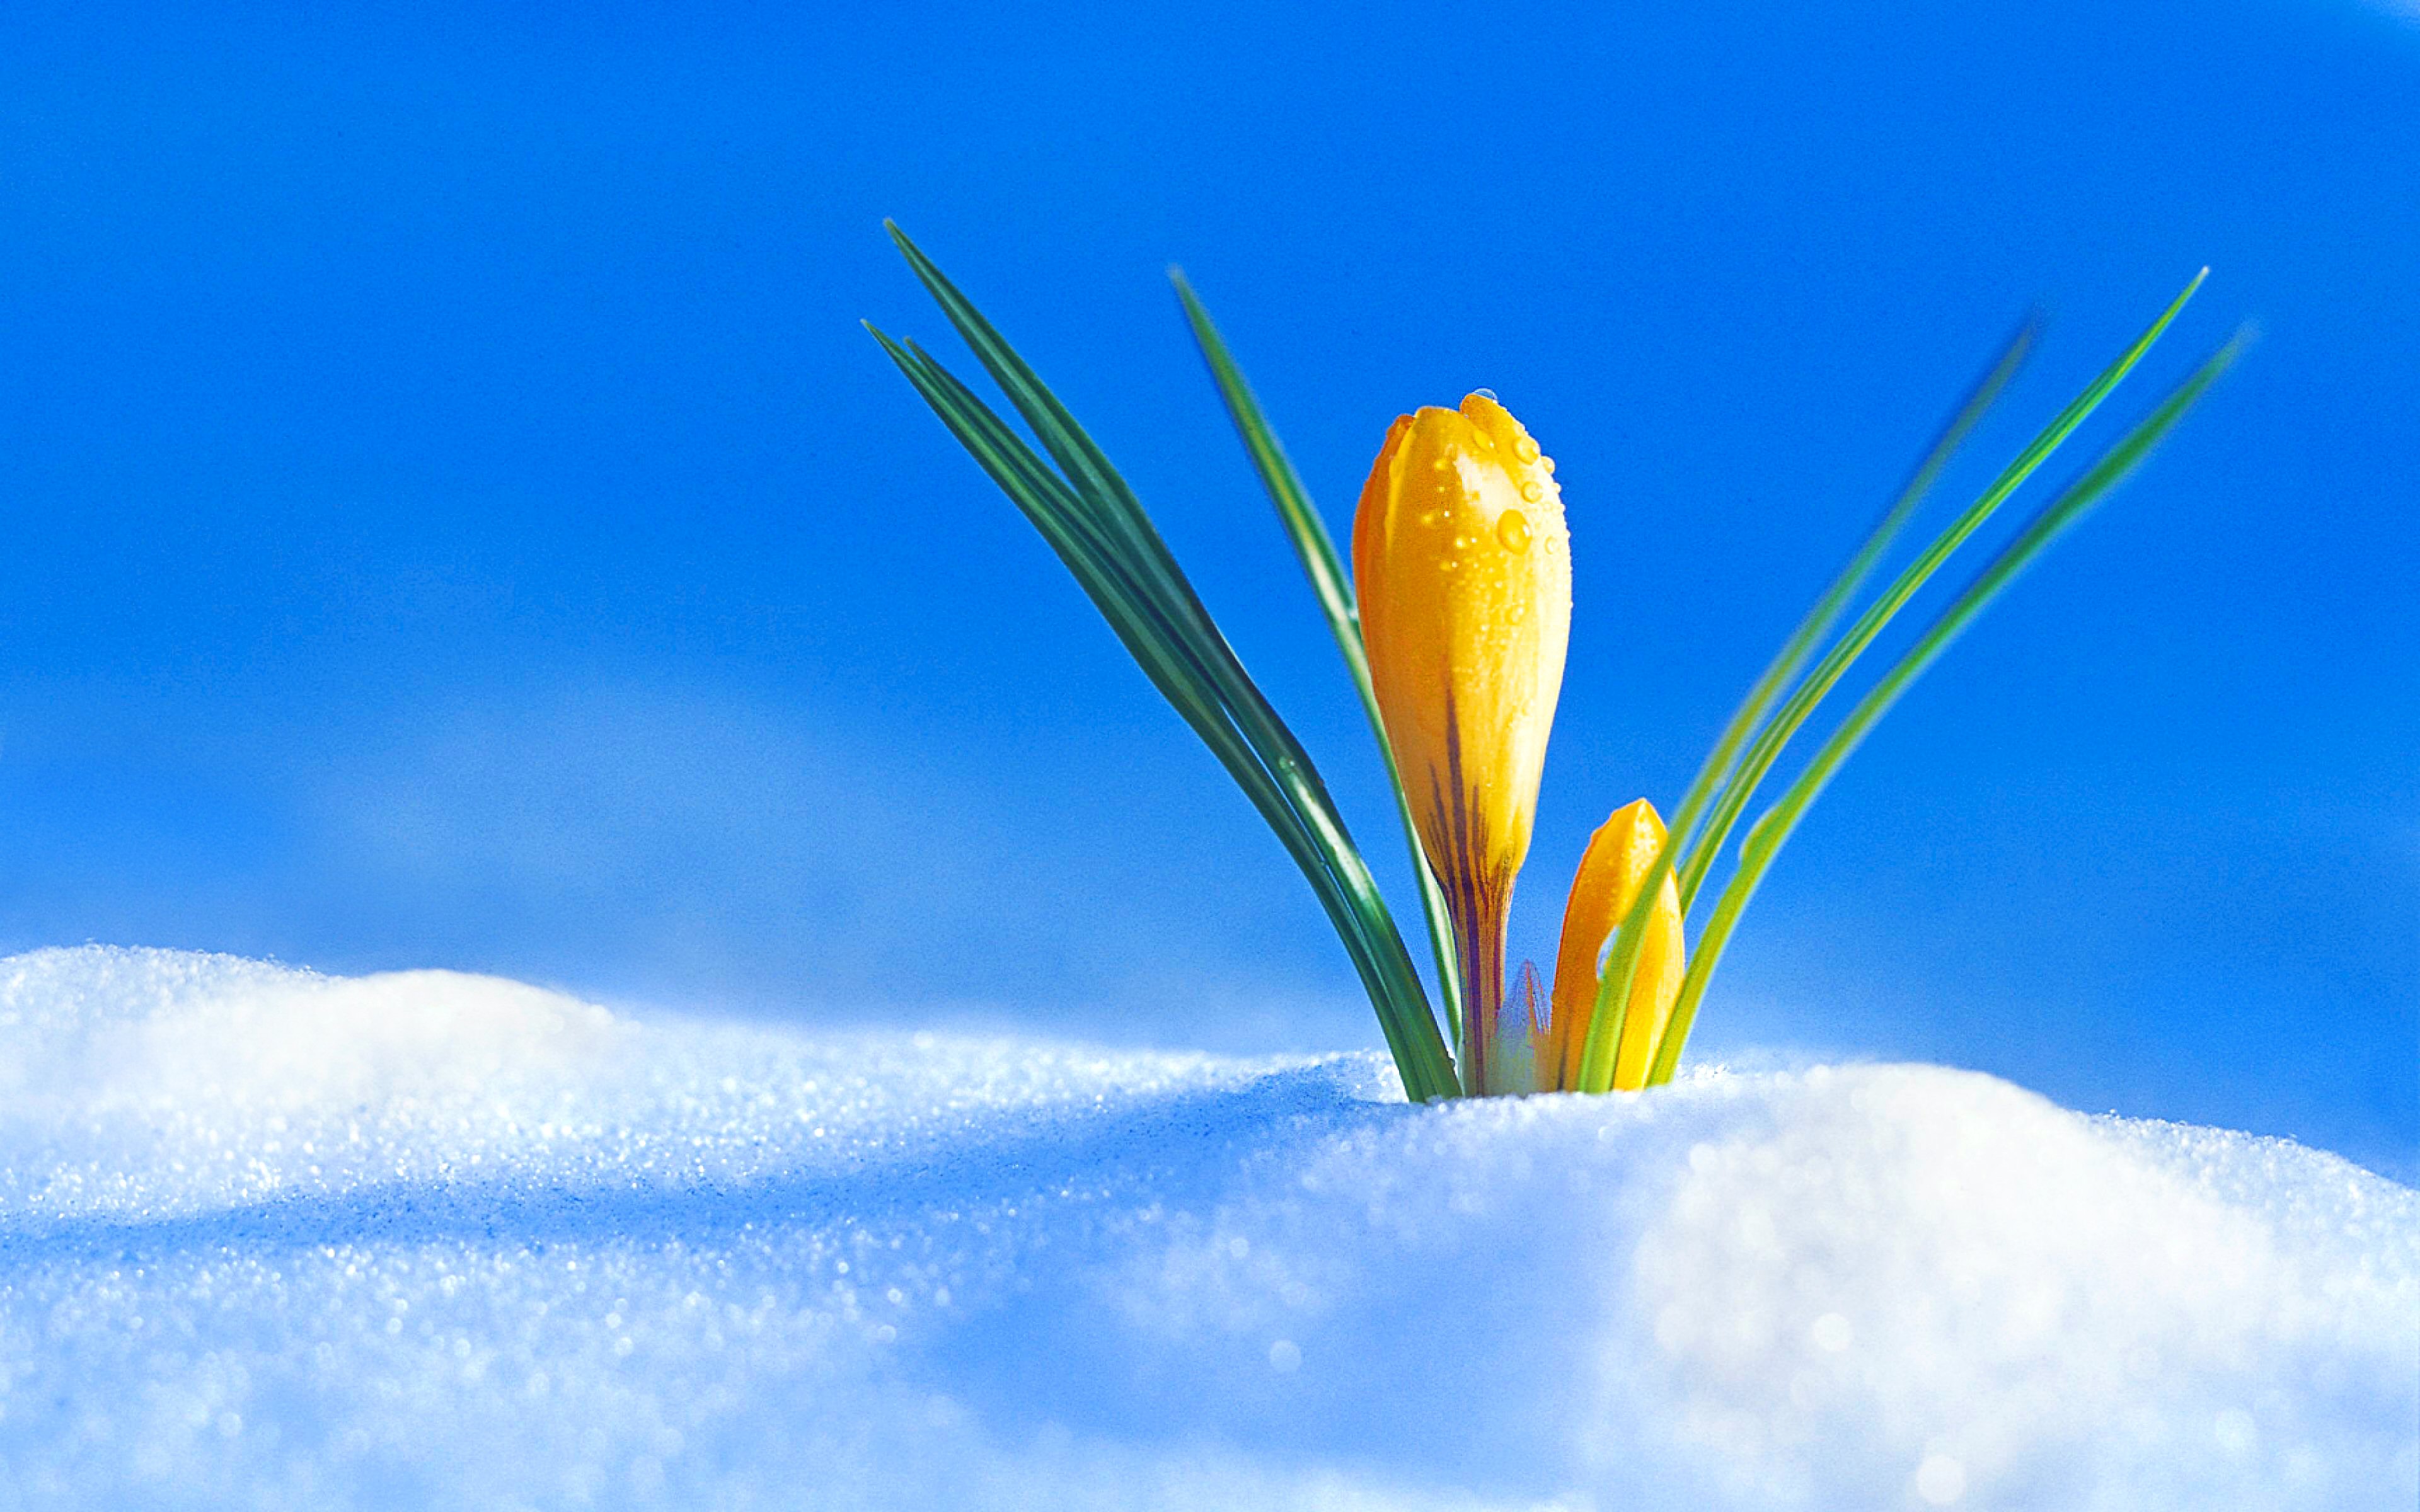 earth, crocus, colorful, nature, snow, spring